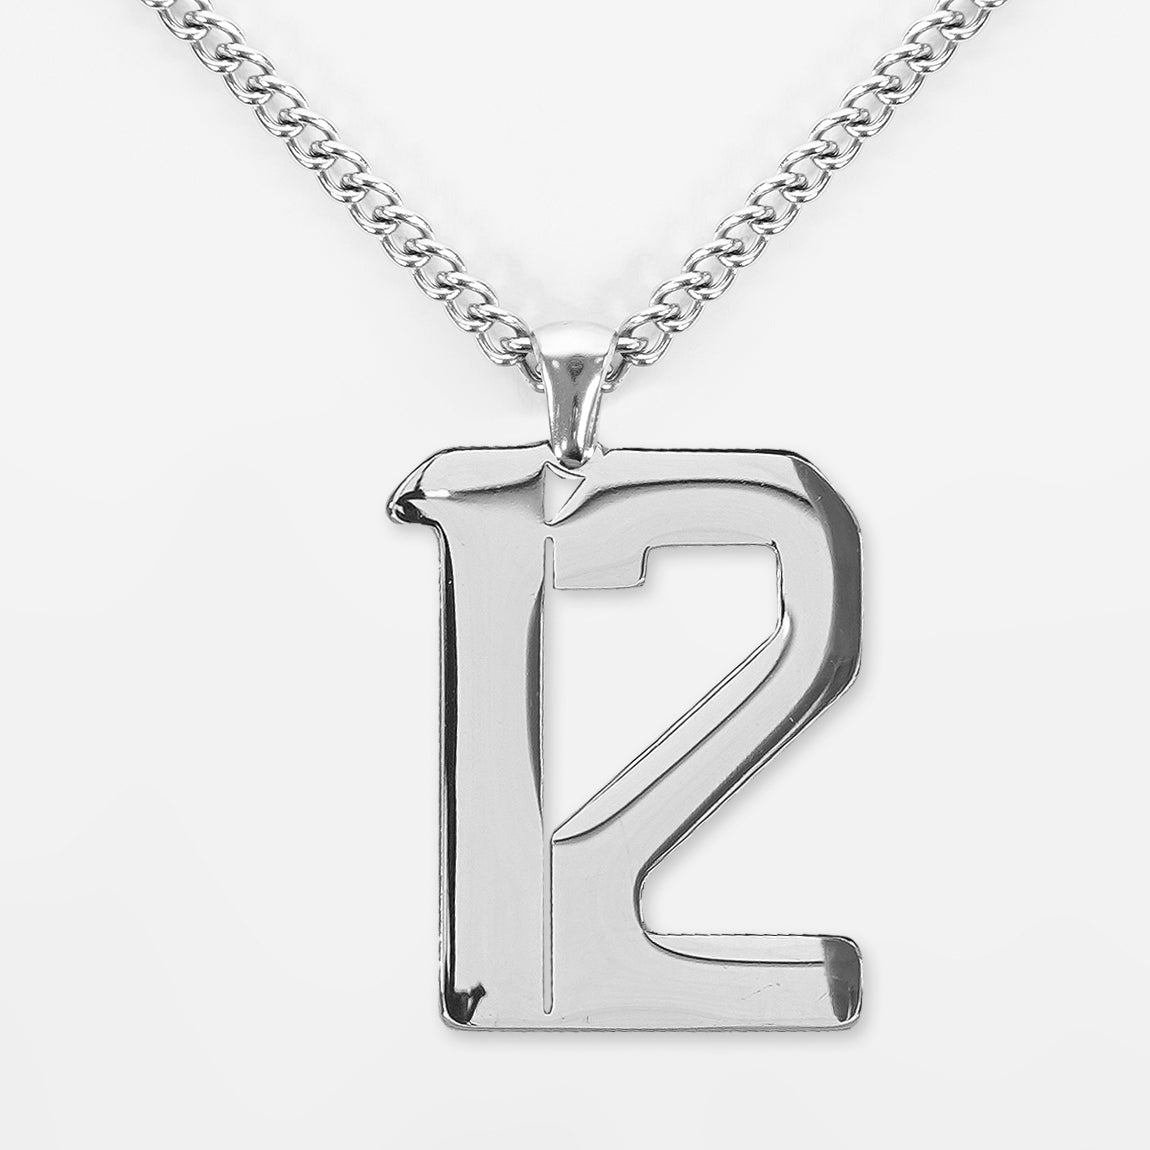 12 Number Pendant with Chain Necklace - Stainless Steel